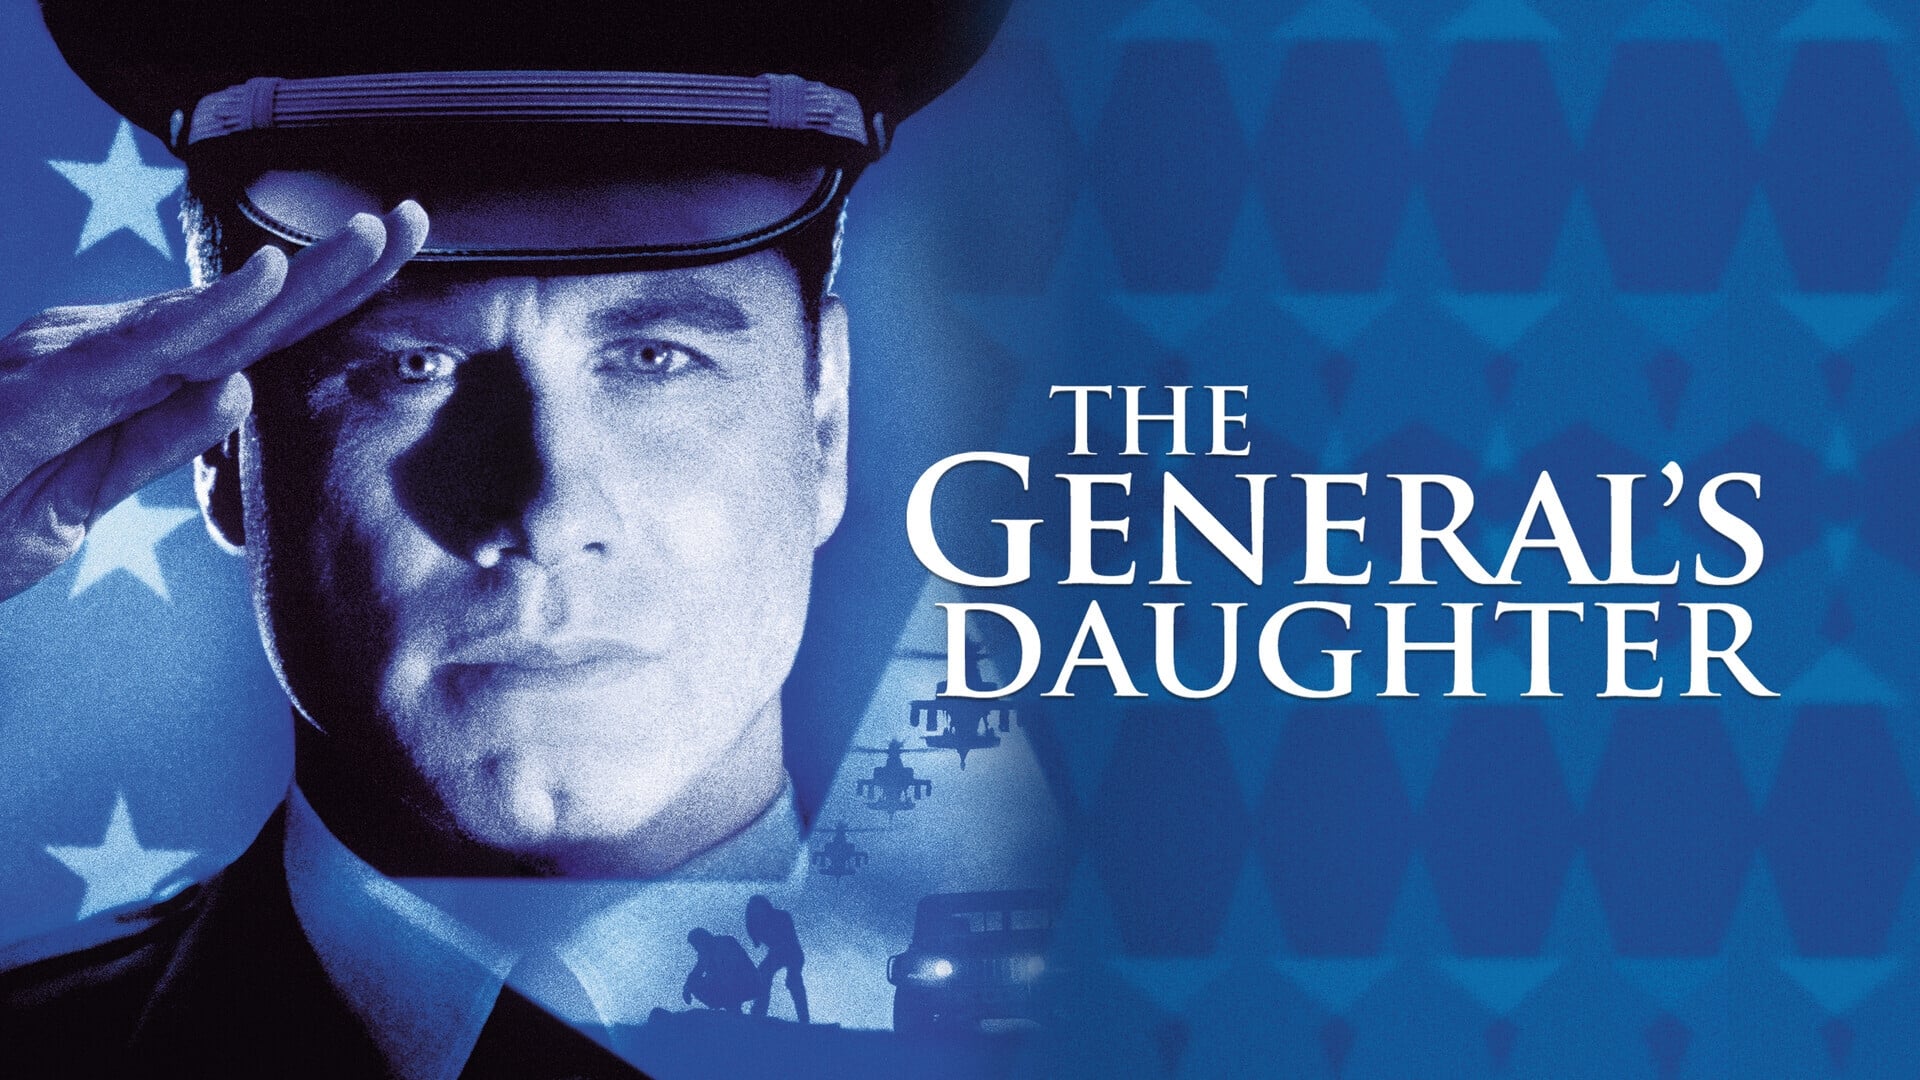 The General's Daughter BACKDROP